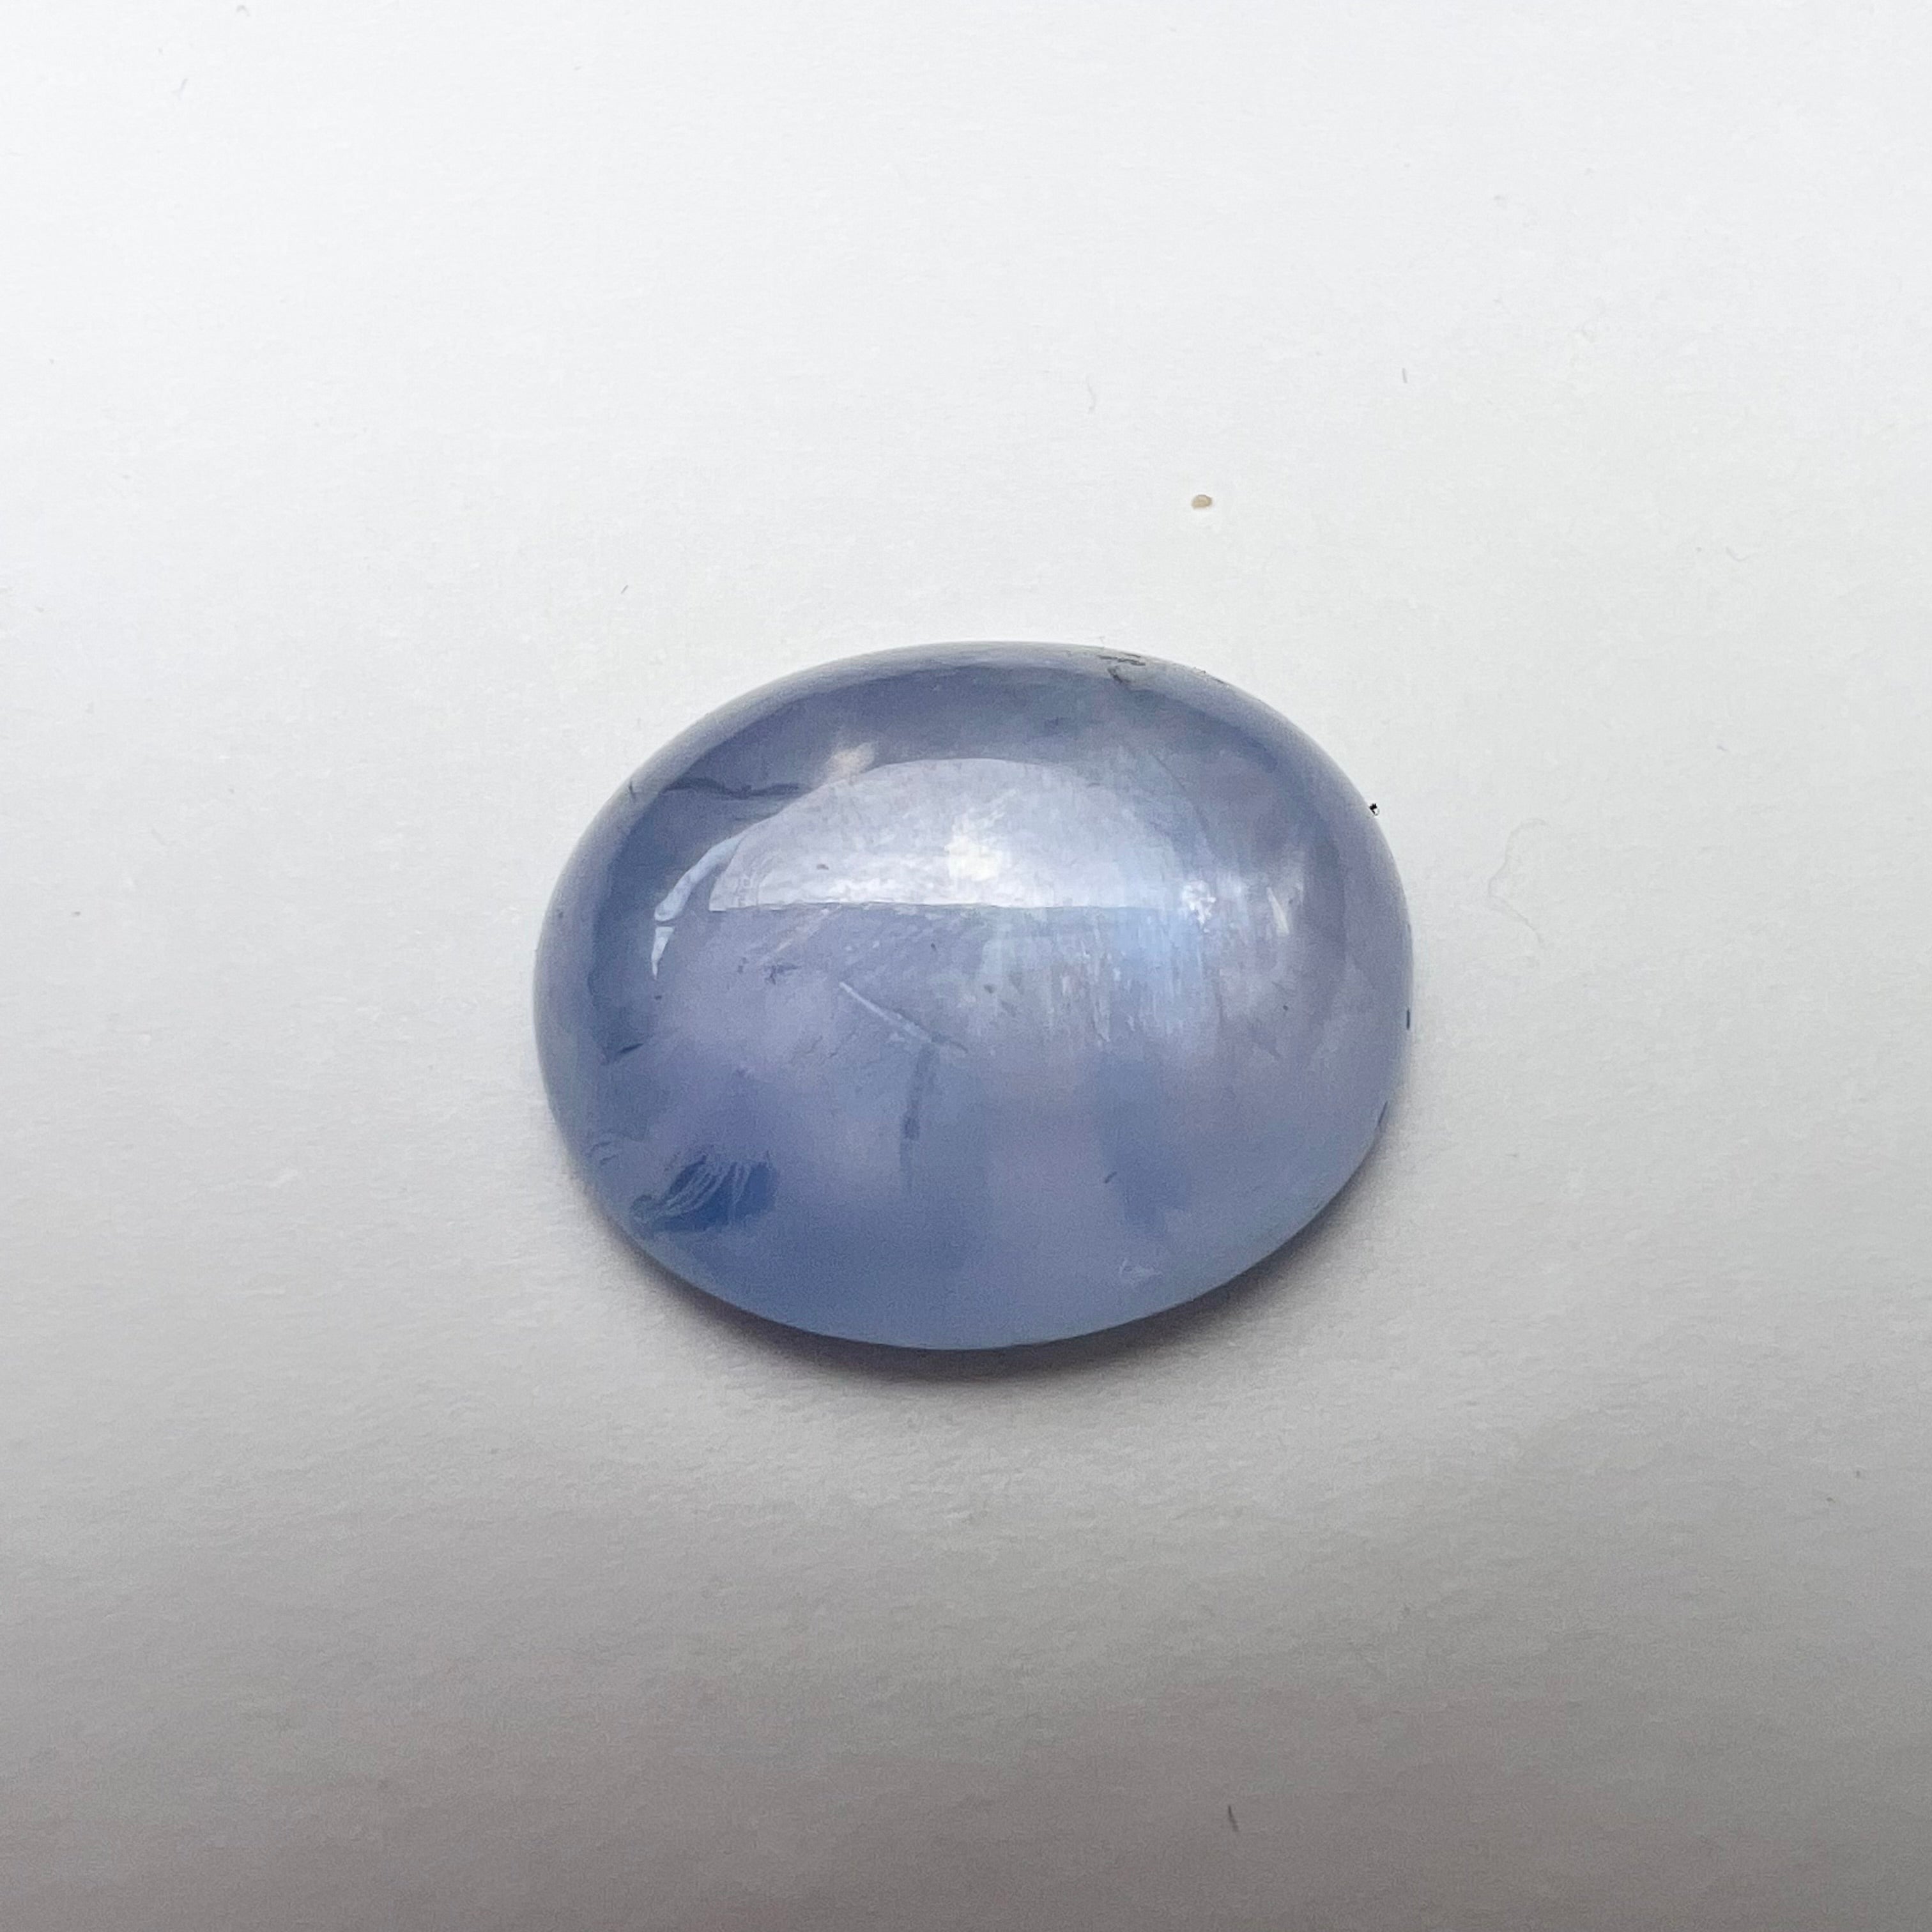 18.22CT Loose Natural Cabochon Sapphire 16.96X14.12mm Earth mined Gemstone